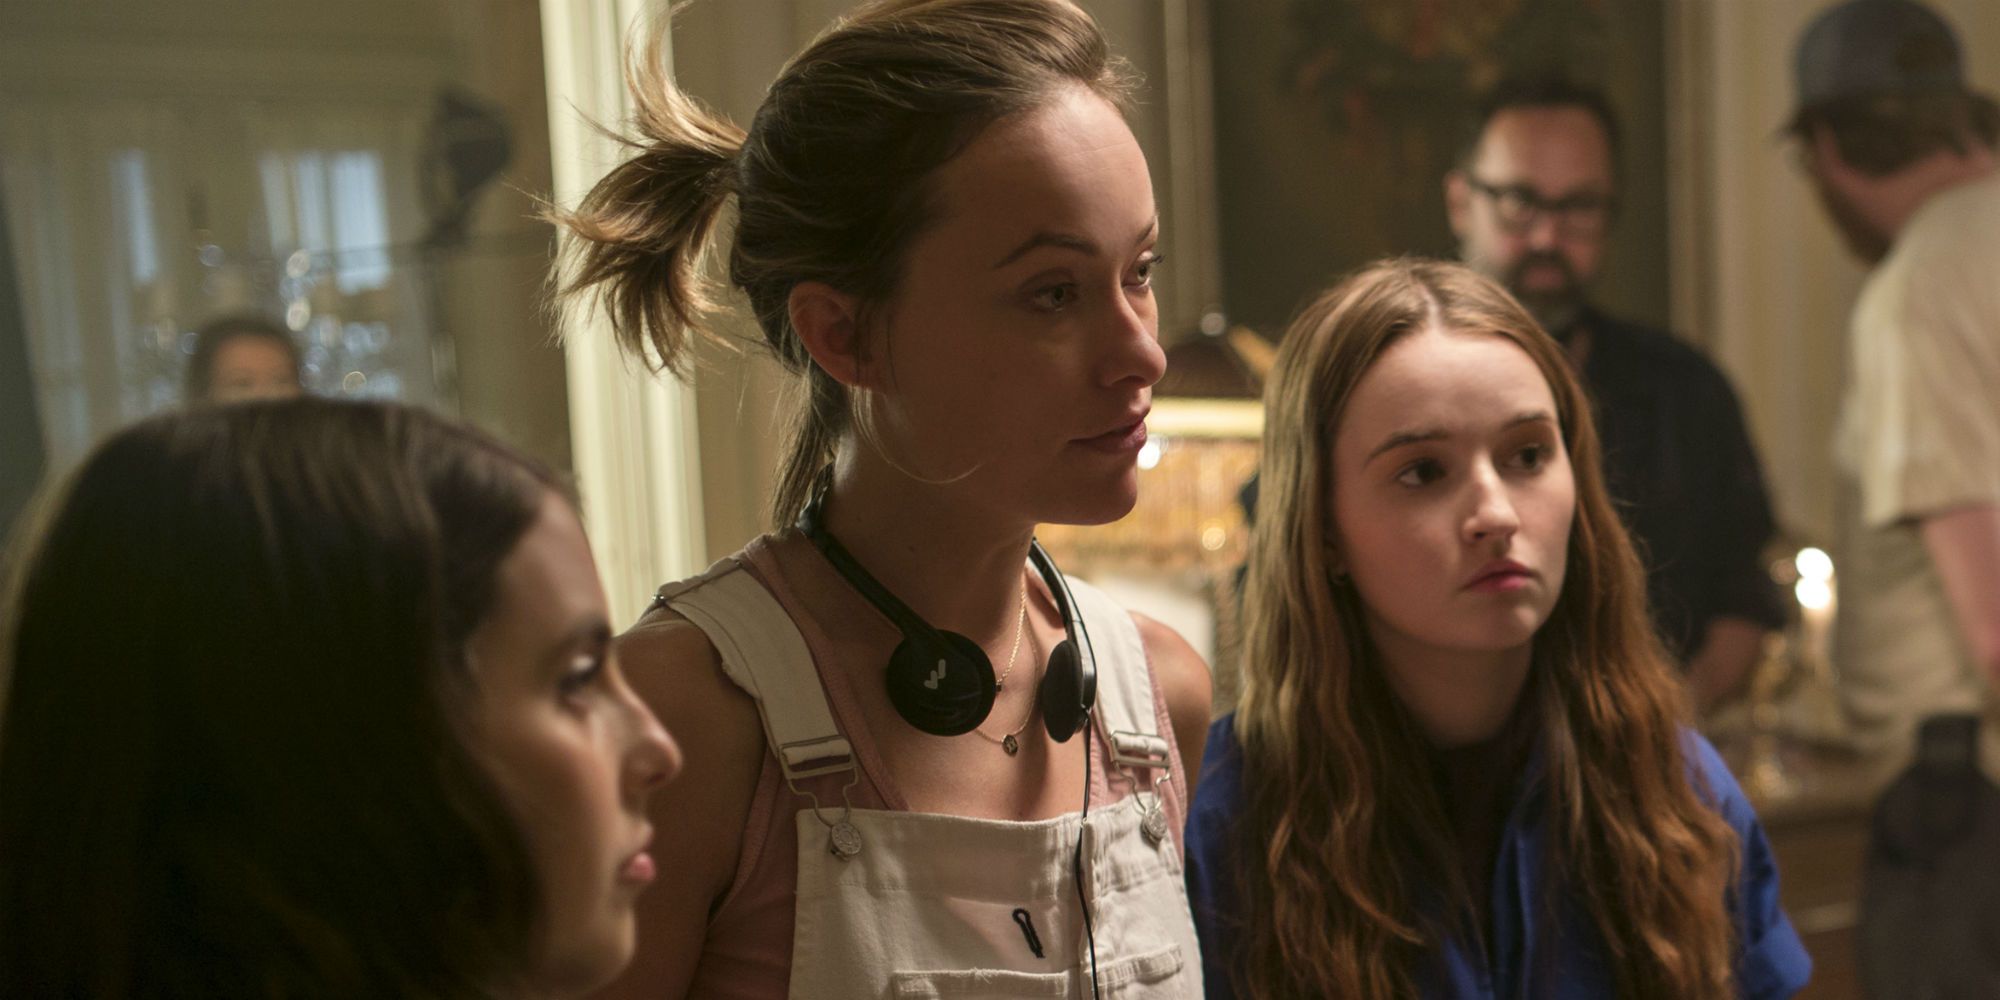 Olivia Wilde on the set of Booksmart with Kaitlyn Dever